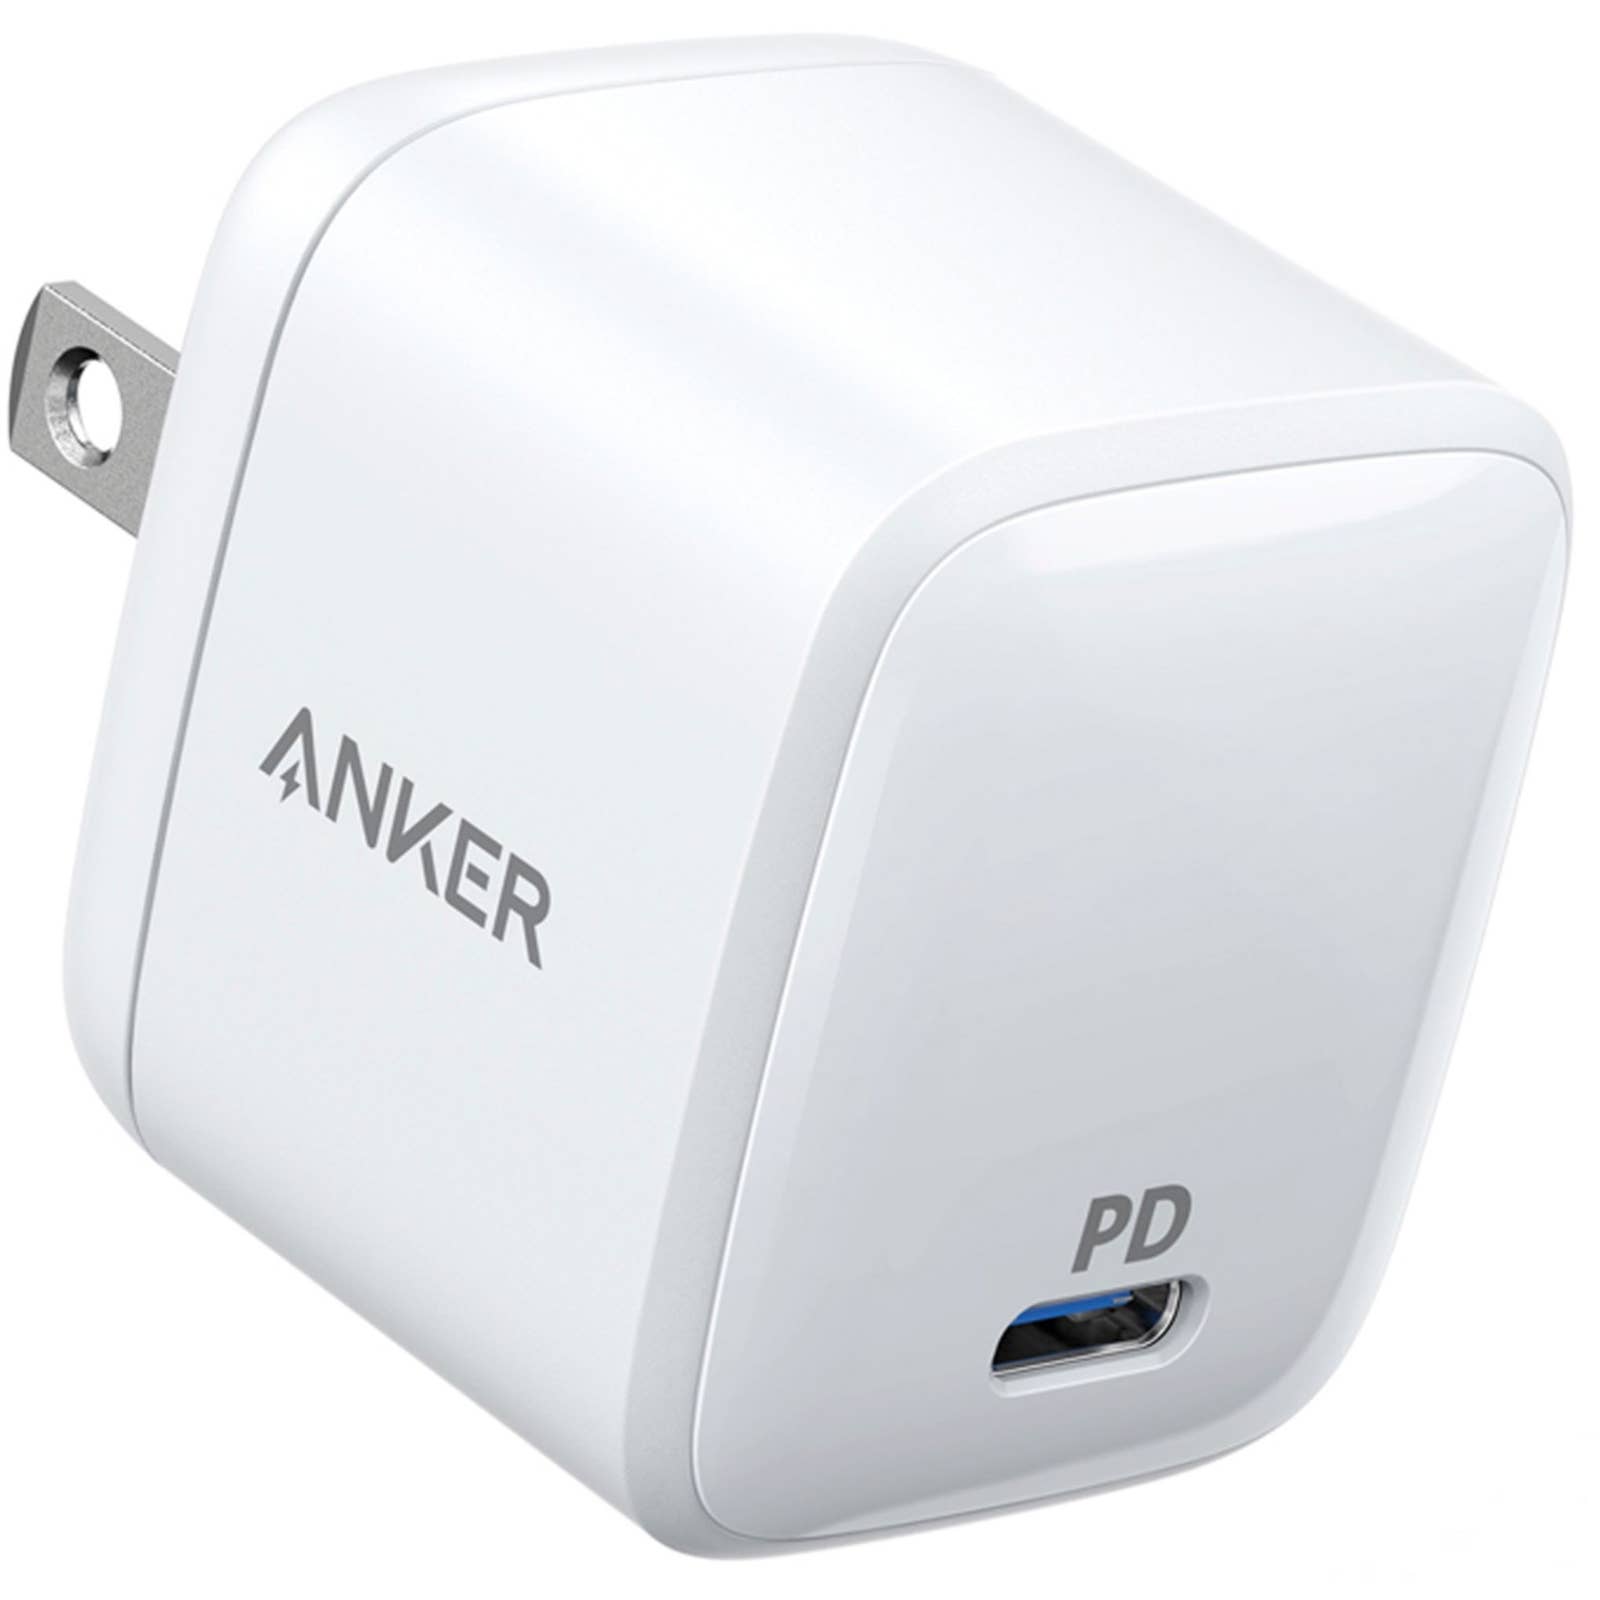 Anker - B2017J23-1 PowerPort PD 30W Bundle with USB C to C Cable 6ft - White